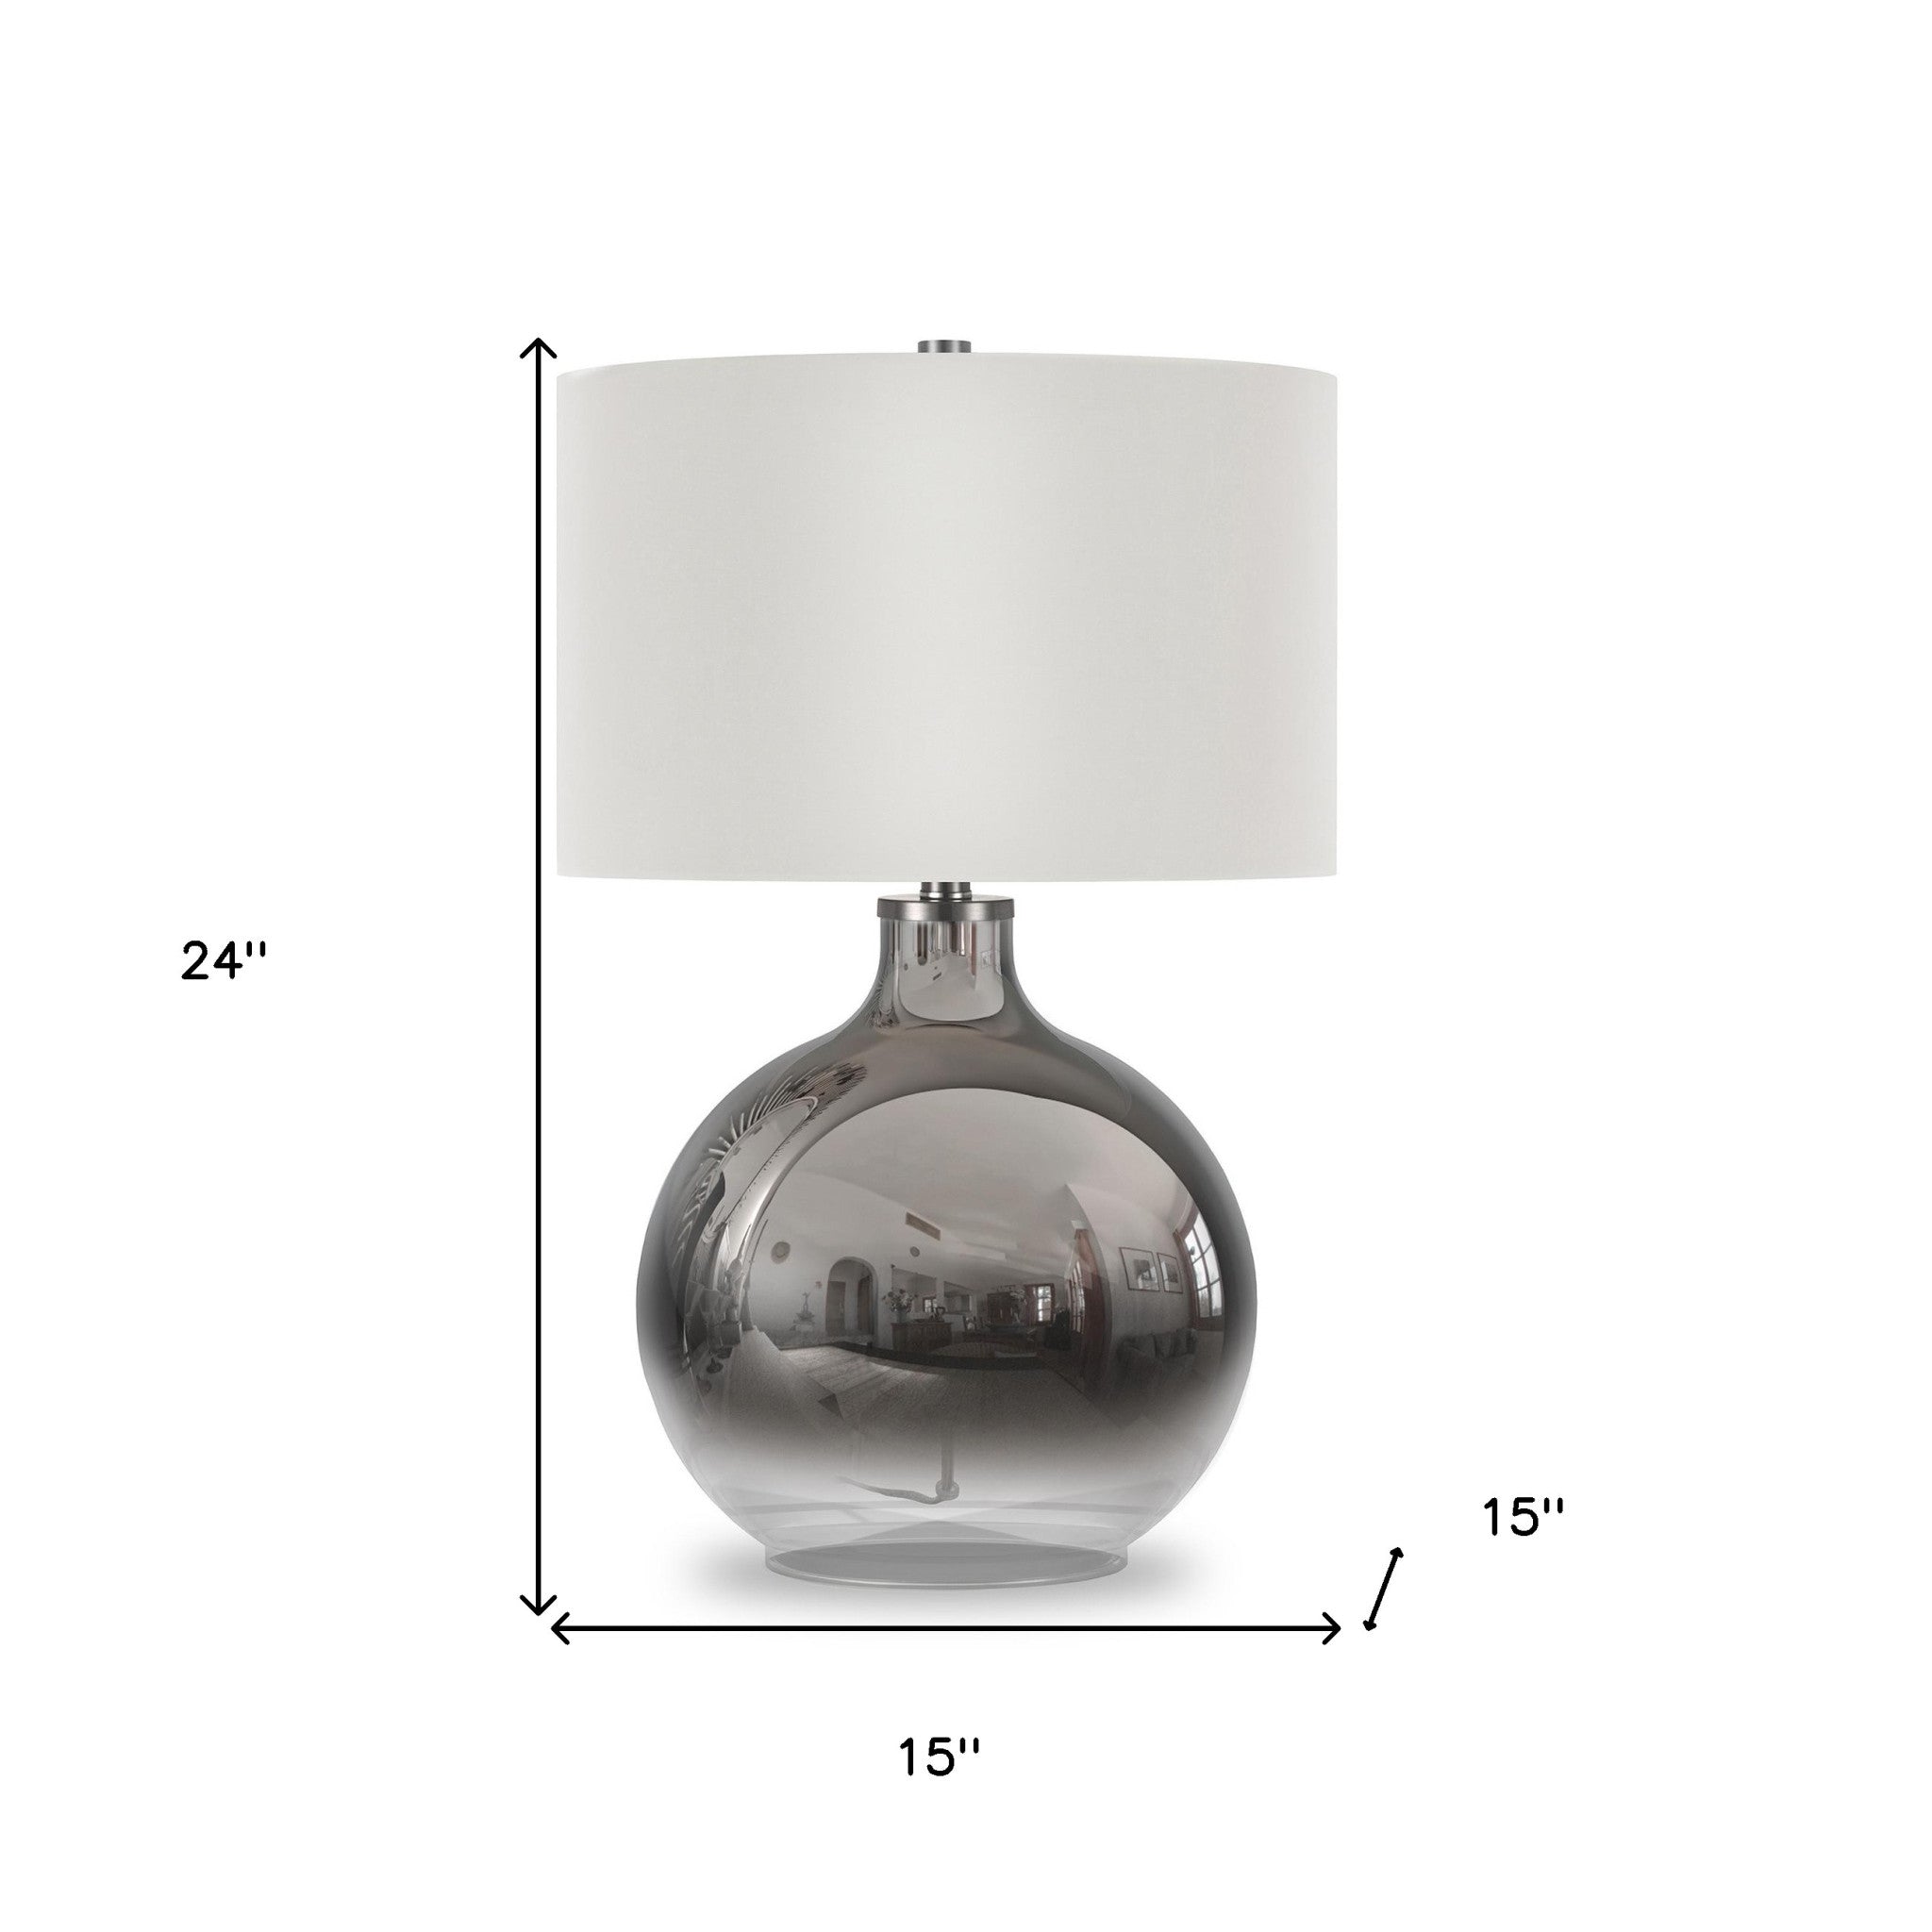 24" Nickel Glass Table Lamp With White Drum Shade